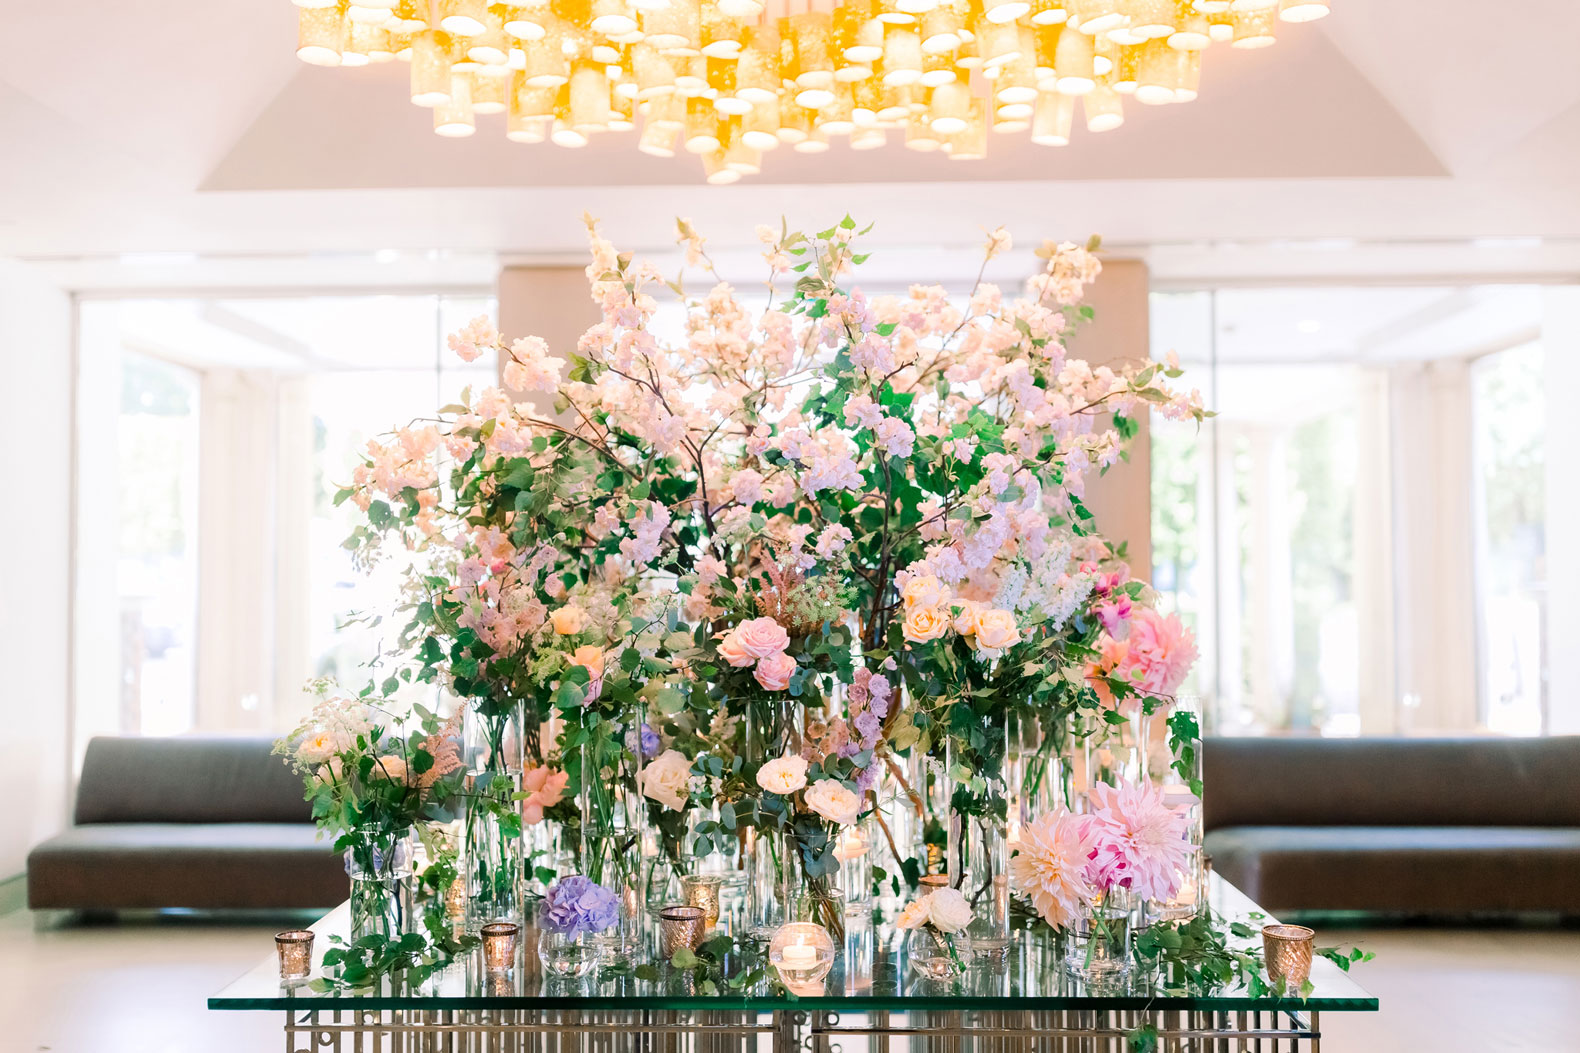 entrance table in a hotel with loads of flowers in vases in a colour palette of blush pink, lilac, cream and poweder blue surrounded by candles